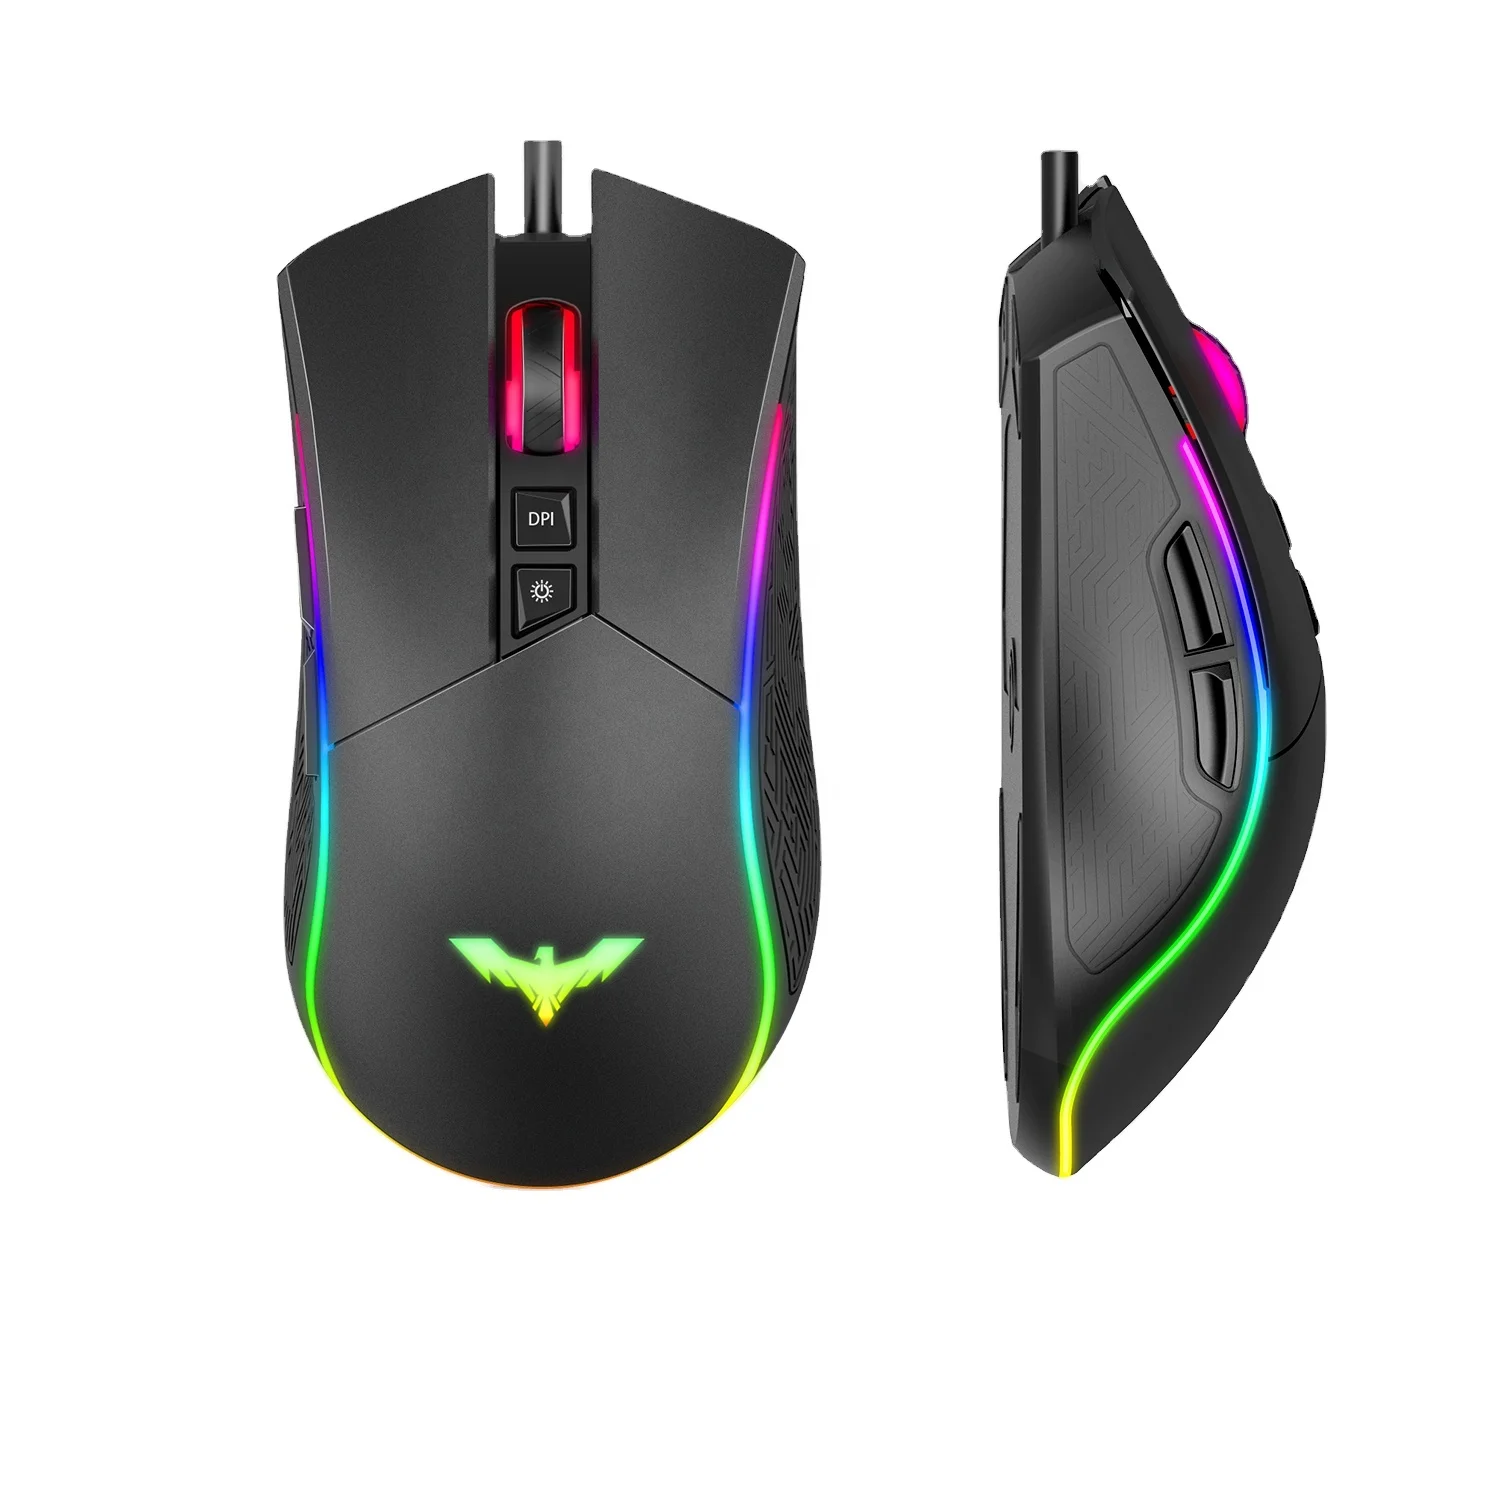 

Havit RGB Gaming Mouse Wired Programmable Ergonomic USB Mice 4800 DPI 7 Buttons & 7 Color Backlit for PC Gamer Computer Desktop